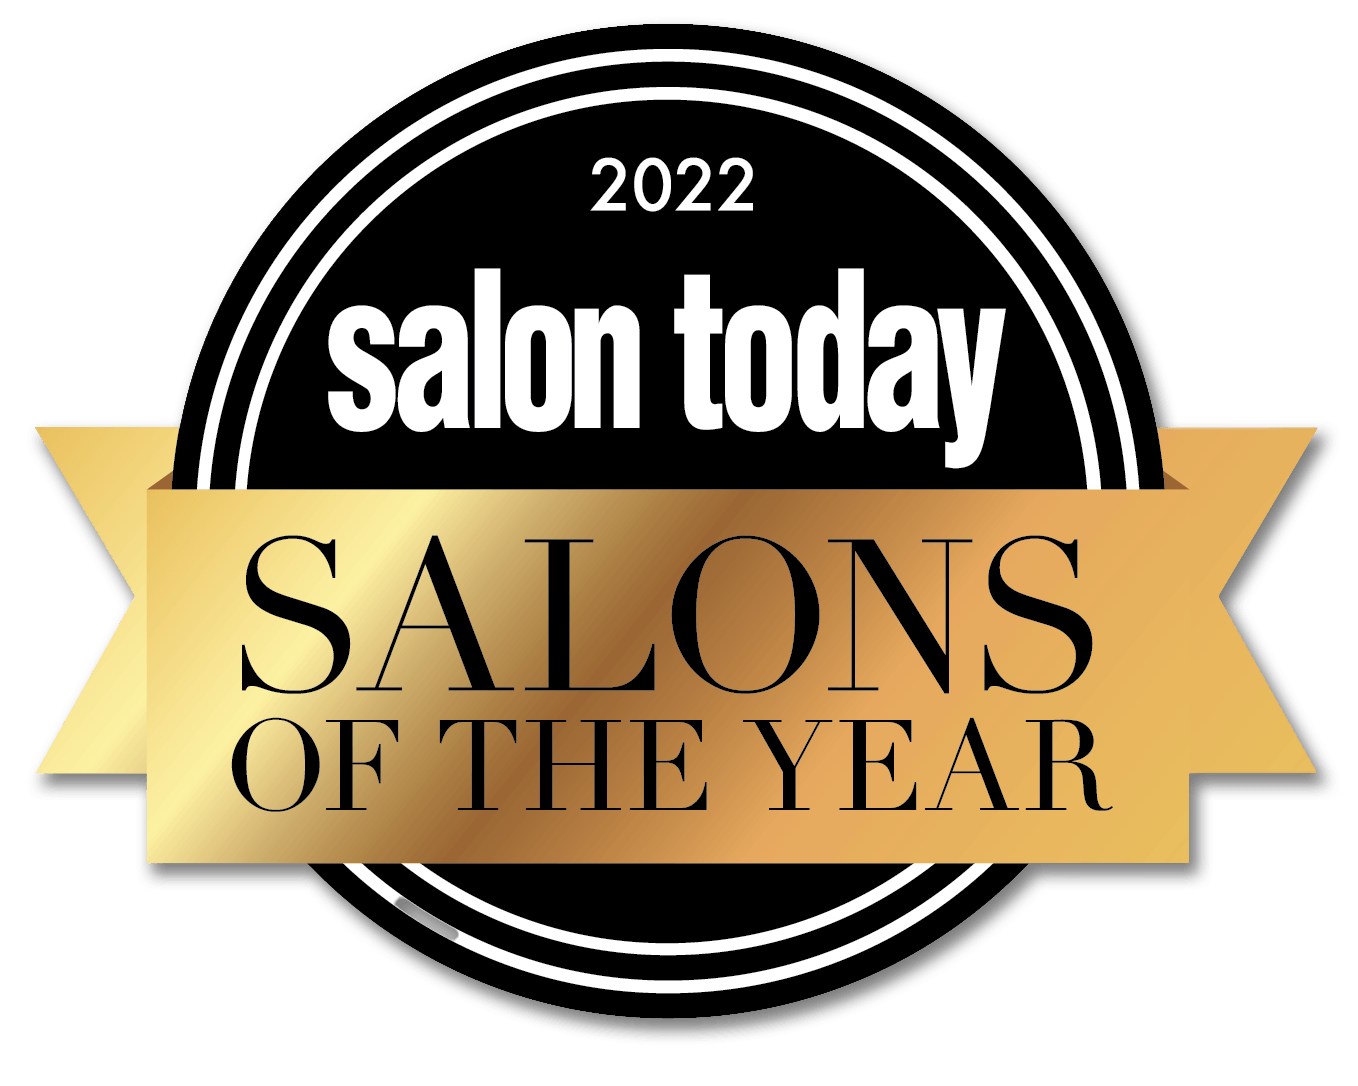 a logo for salon today salons of the year